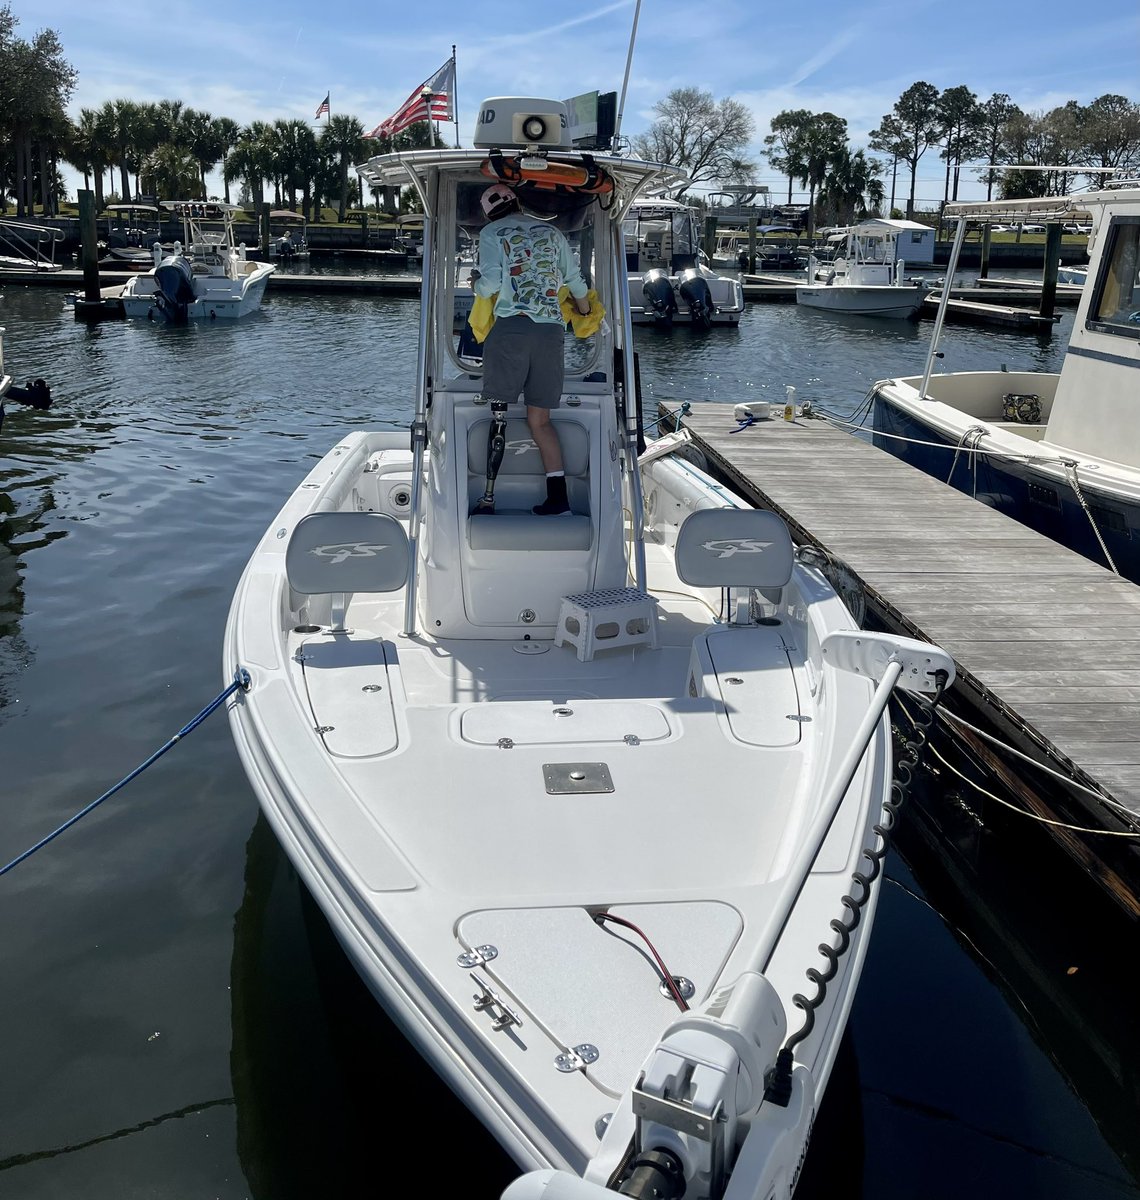 #reelpirate is ready for the last #uscgaux patrol of the month tomorrow.  These pics really show the lines of the @glasstreamboats 260 TE.  It only lacks 2” from being 27’. Some of the most comfortable riding hulls out there for bay boats. #centerconsole #bayboat #smooth